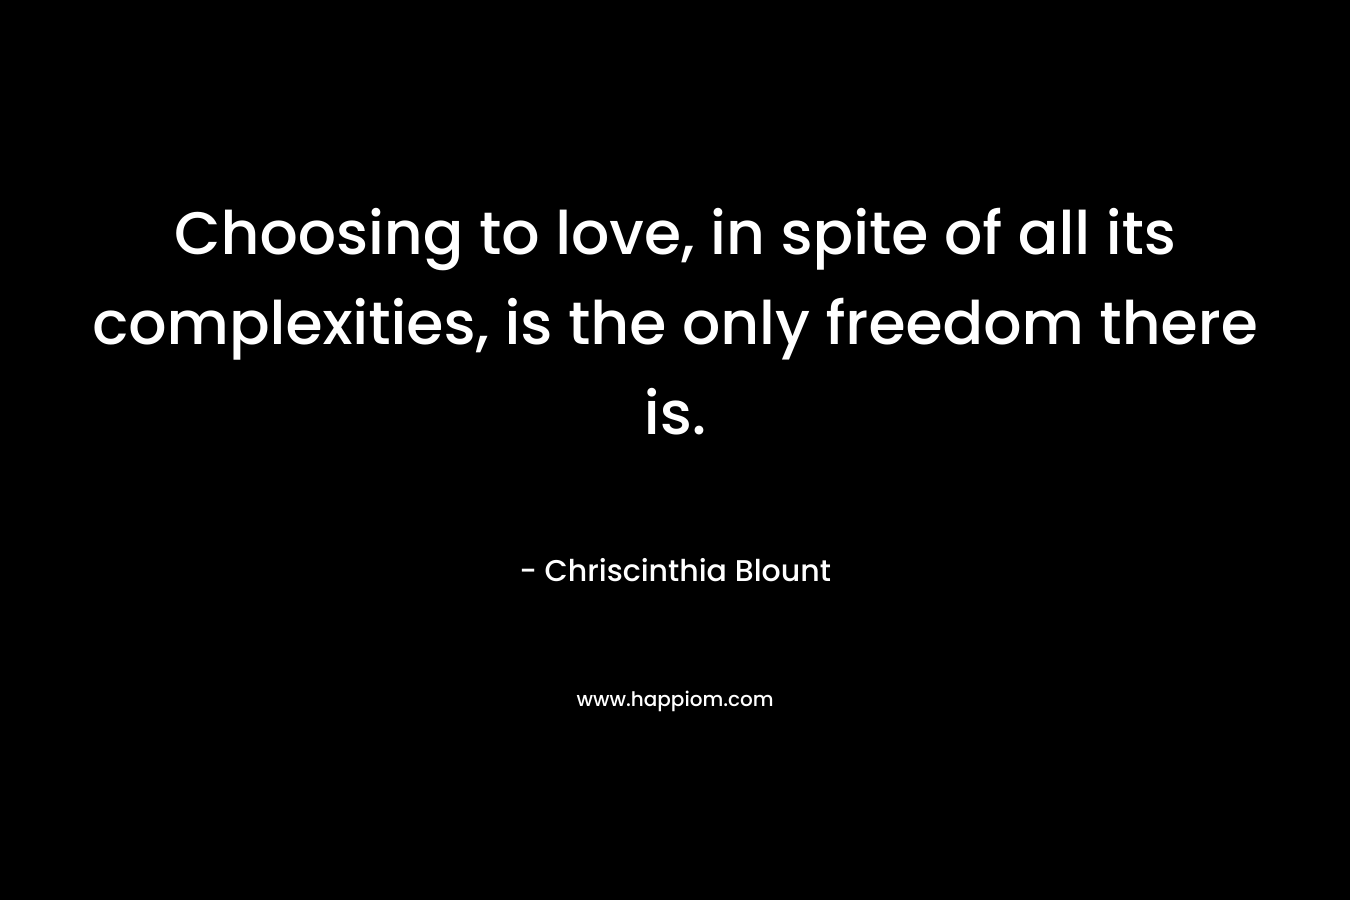 Choosing to love, in spite of all its complexities, is the only freedom there is.